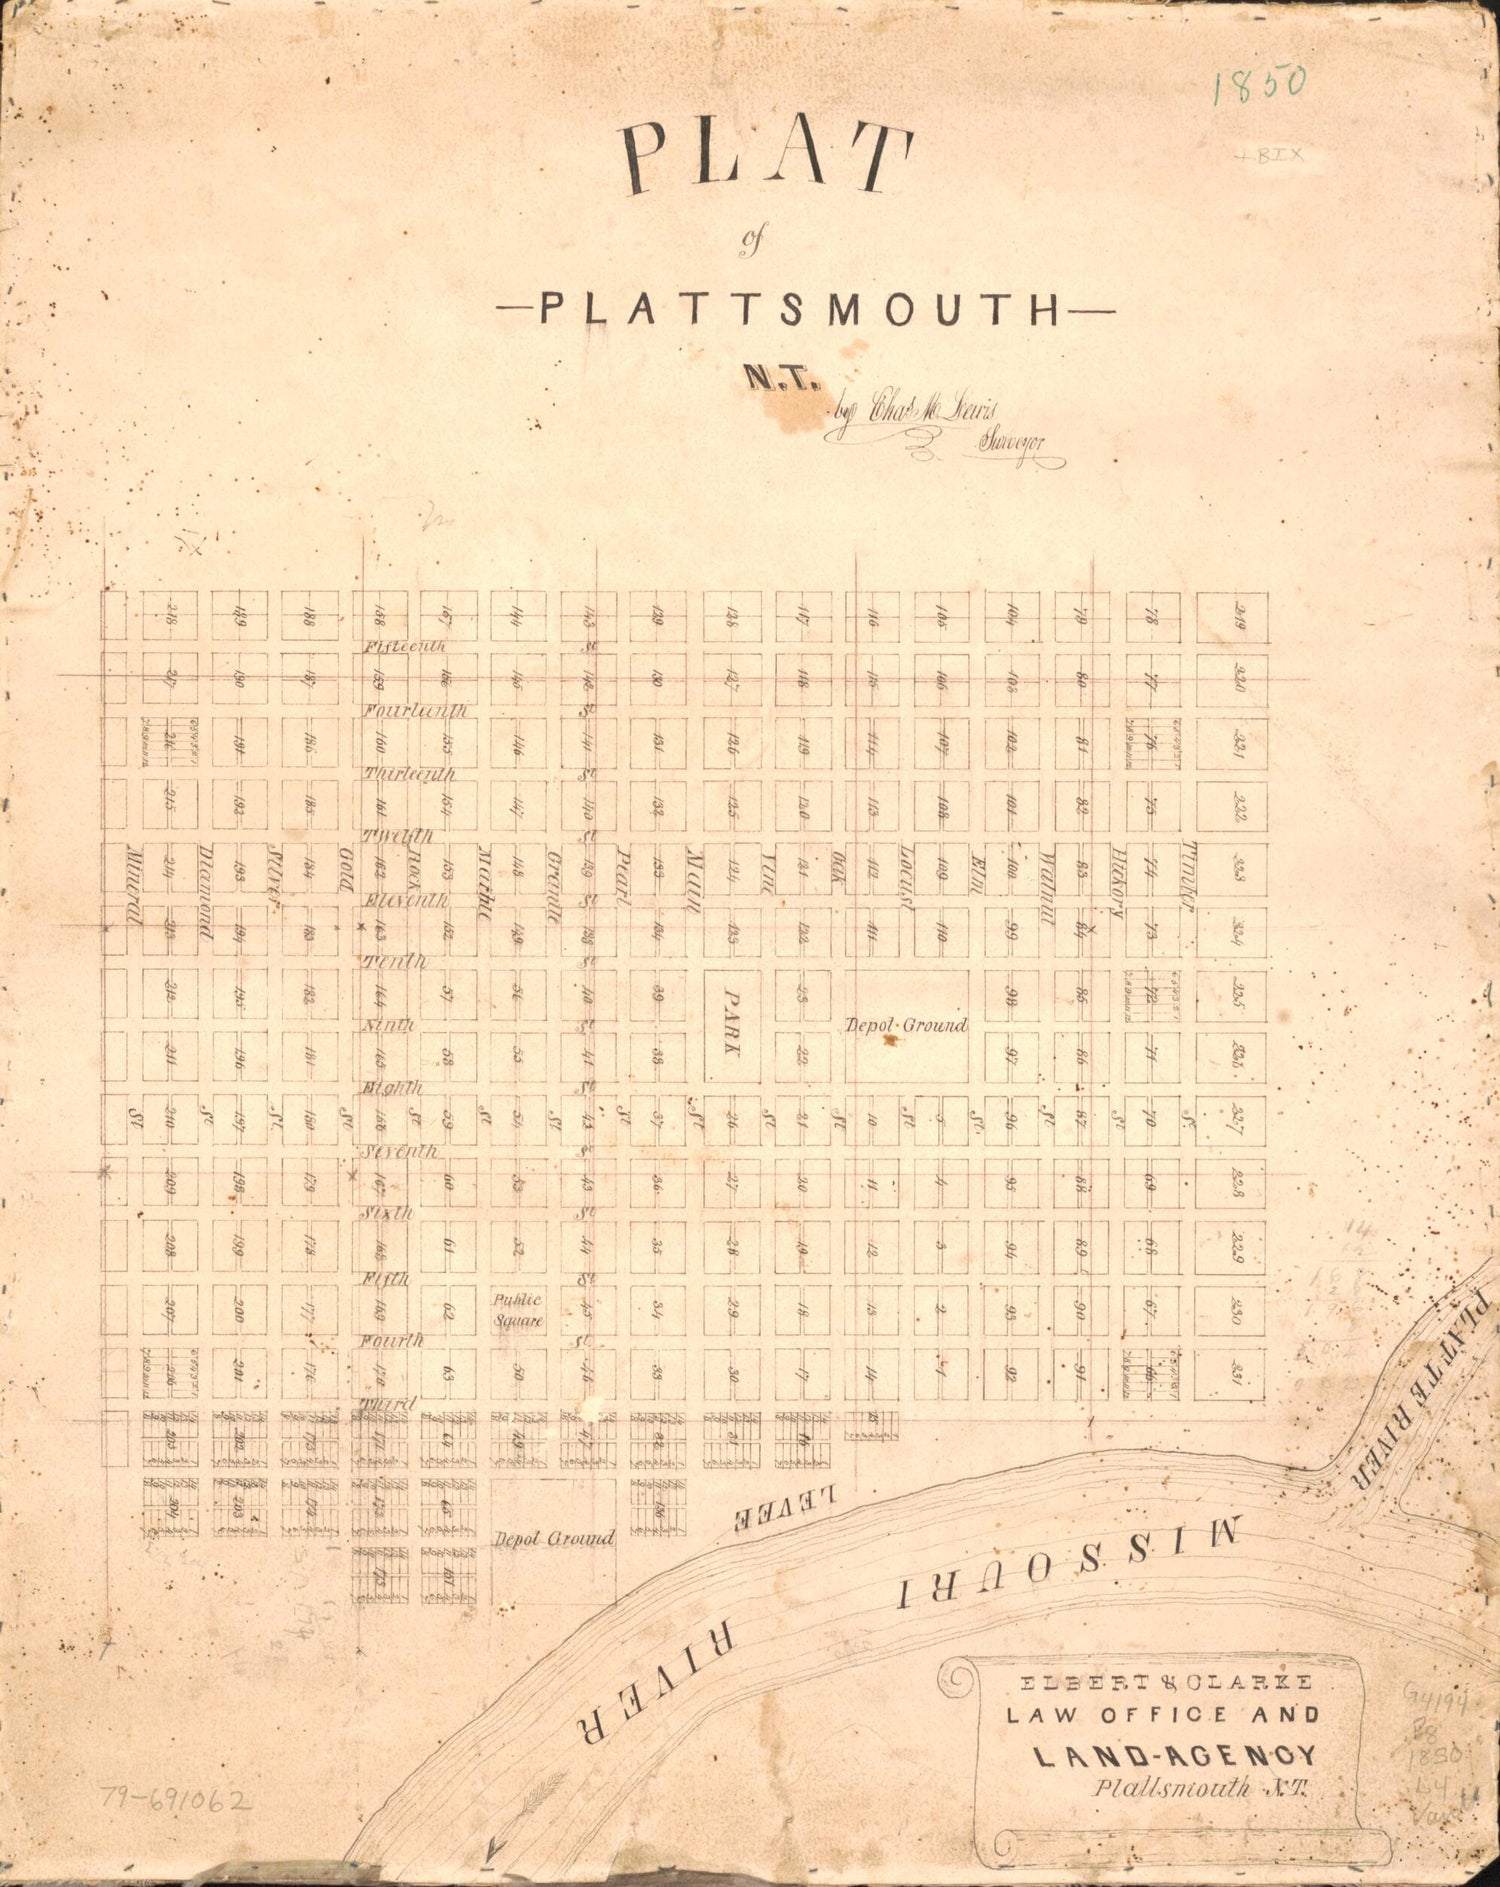 This old map of Plat of Plattsmouth, N.T from 1850 was created by  Elbert &amp; Clarke, Charles M. Lewis in 1850